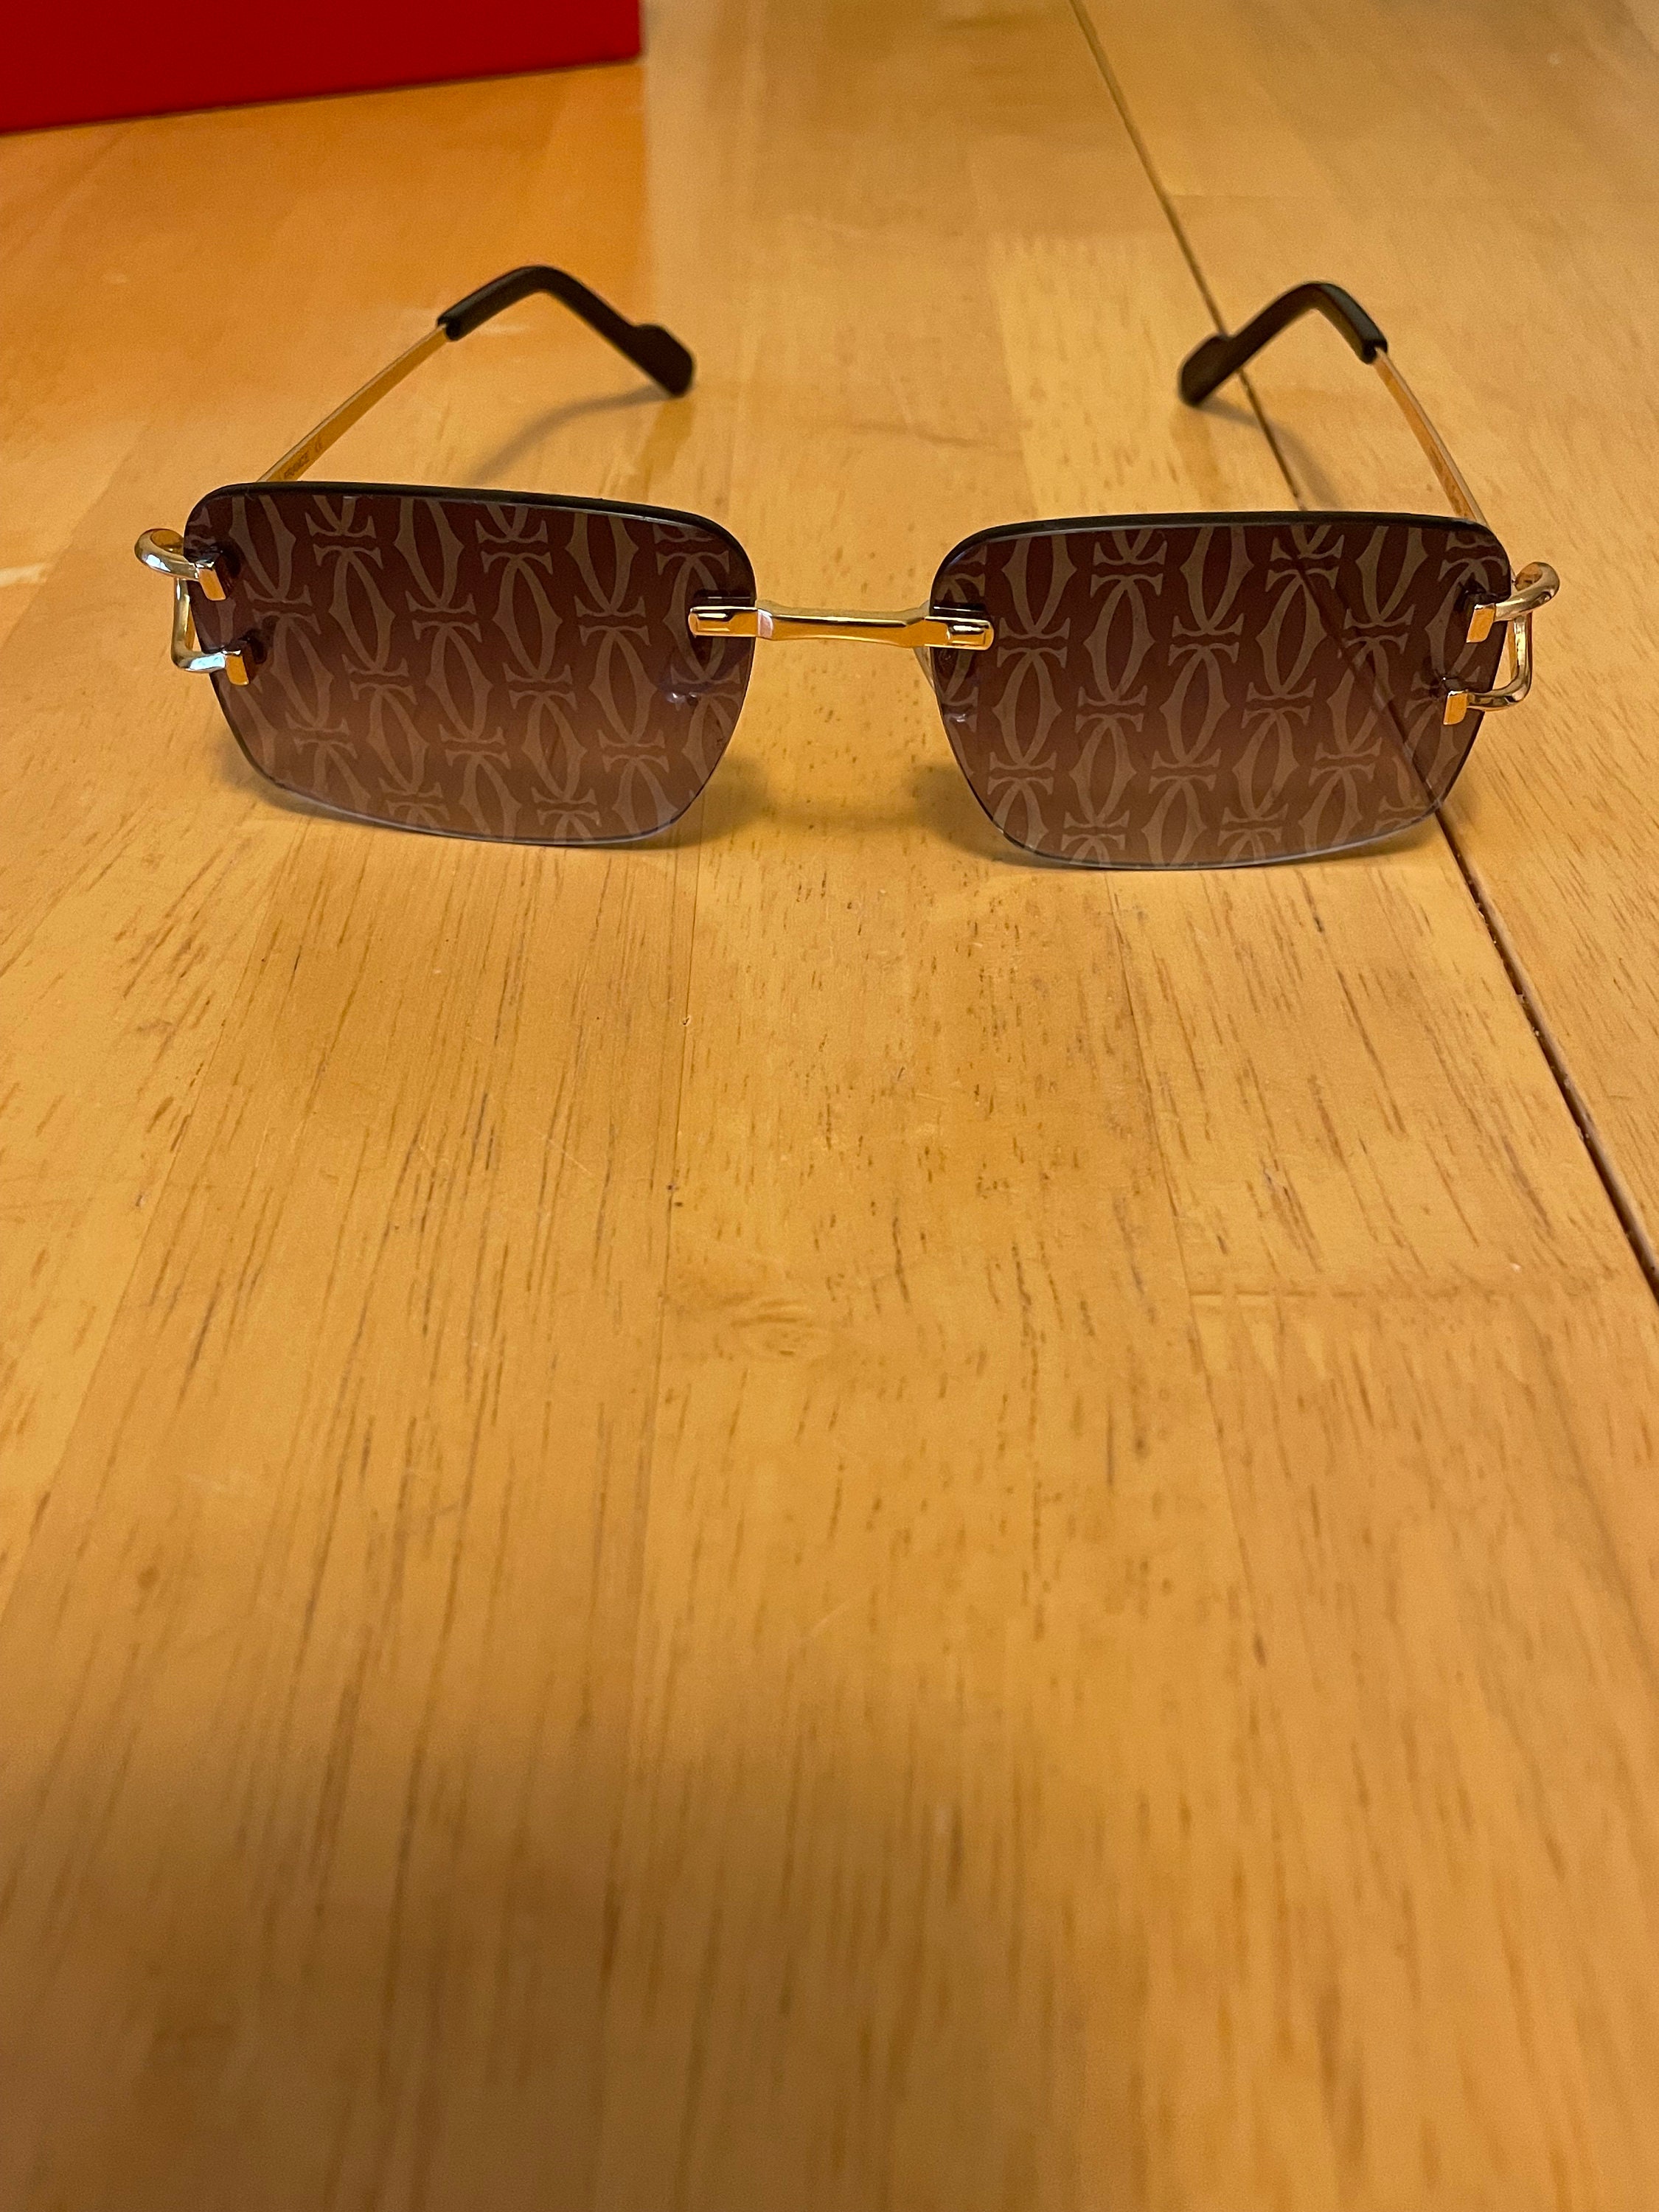 Replacement Lenses For Cartier C Decor Metal,wood Or Horn Harm , Size 55/37  | eBay